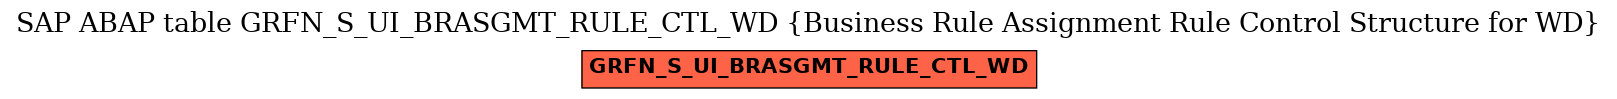 E-R Diagram for table GRFN_S_UI_BRASGMT_RULE_CTL_WD (Business Rule Assignment Rule Control Structure for WD)